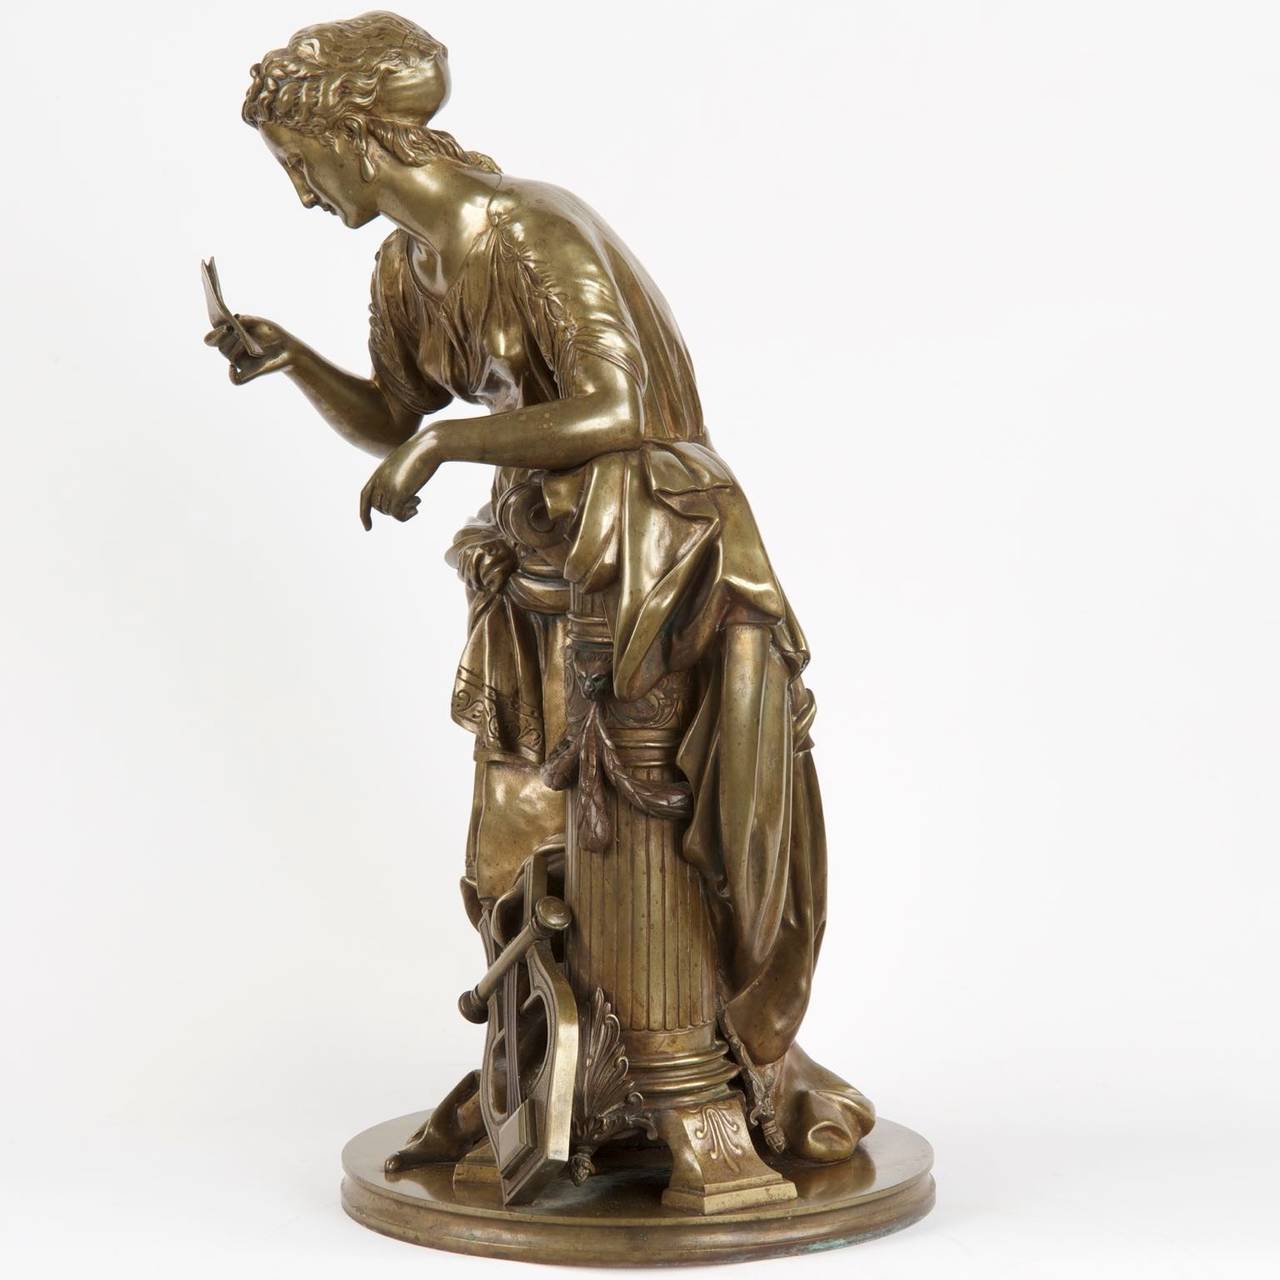 GILDED BRONZE SCULPTURE OF A CLASSICAL MAIDEN AFTER A MODEL BY JEAN-LOUIS GREGOIRE (FRENCH, 1840-90), Unsigned, Late 19th Century

Item # 411FDQ15

Though unsigned, this sculpture is a catalogued collaboration of Jean-Louis Grégoire and his